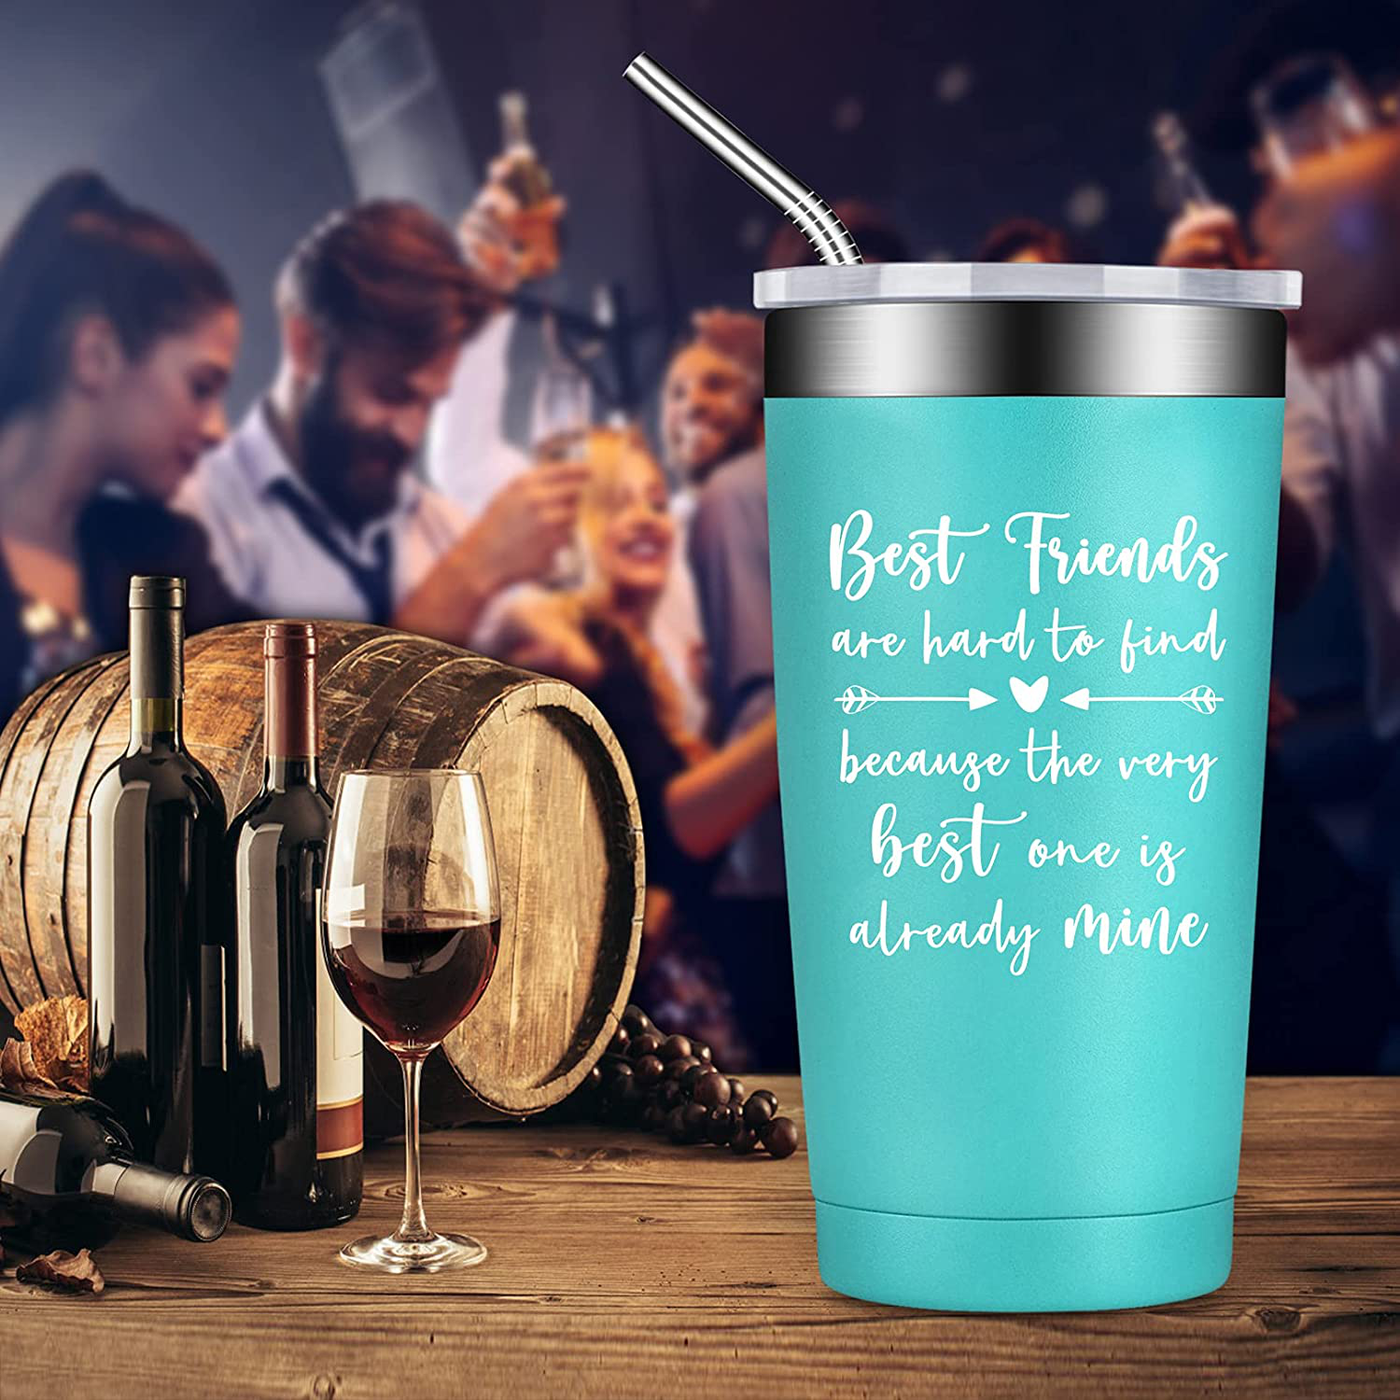 BIRGILT Best Friend Gift for Women - Gifts for Best Friends - Funny Friendship Birthday Gifts for Friend Female, Bff, Coworker, Sister, Woman, Her - 20oz Friend Tumbler Cups with Straw